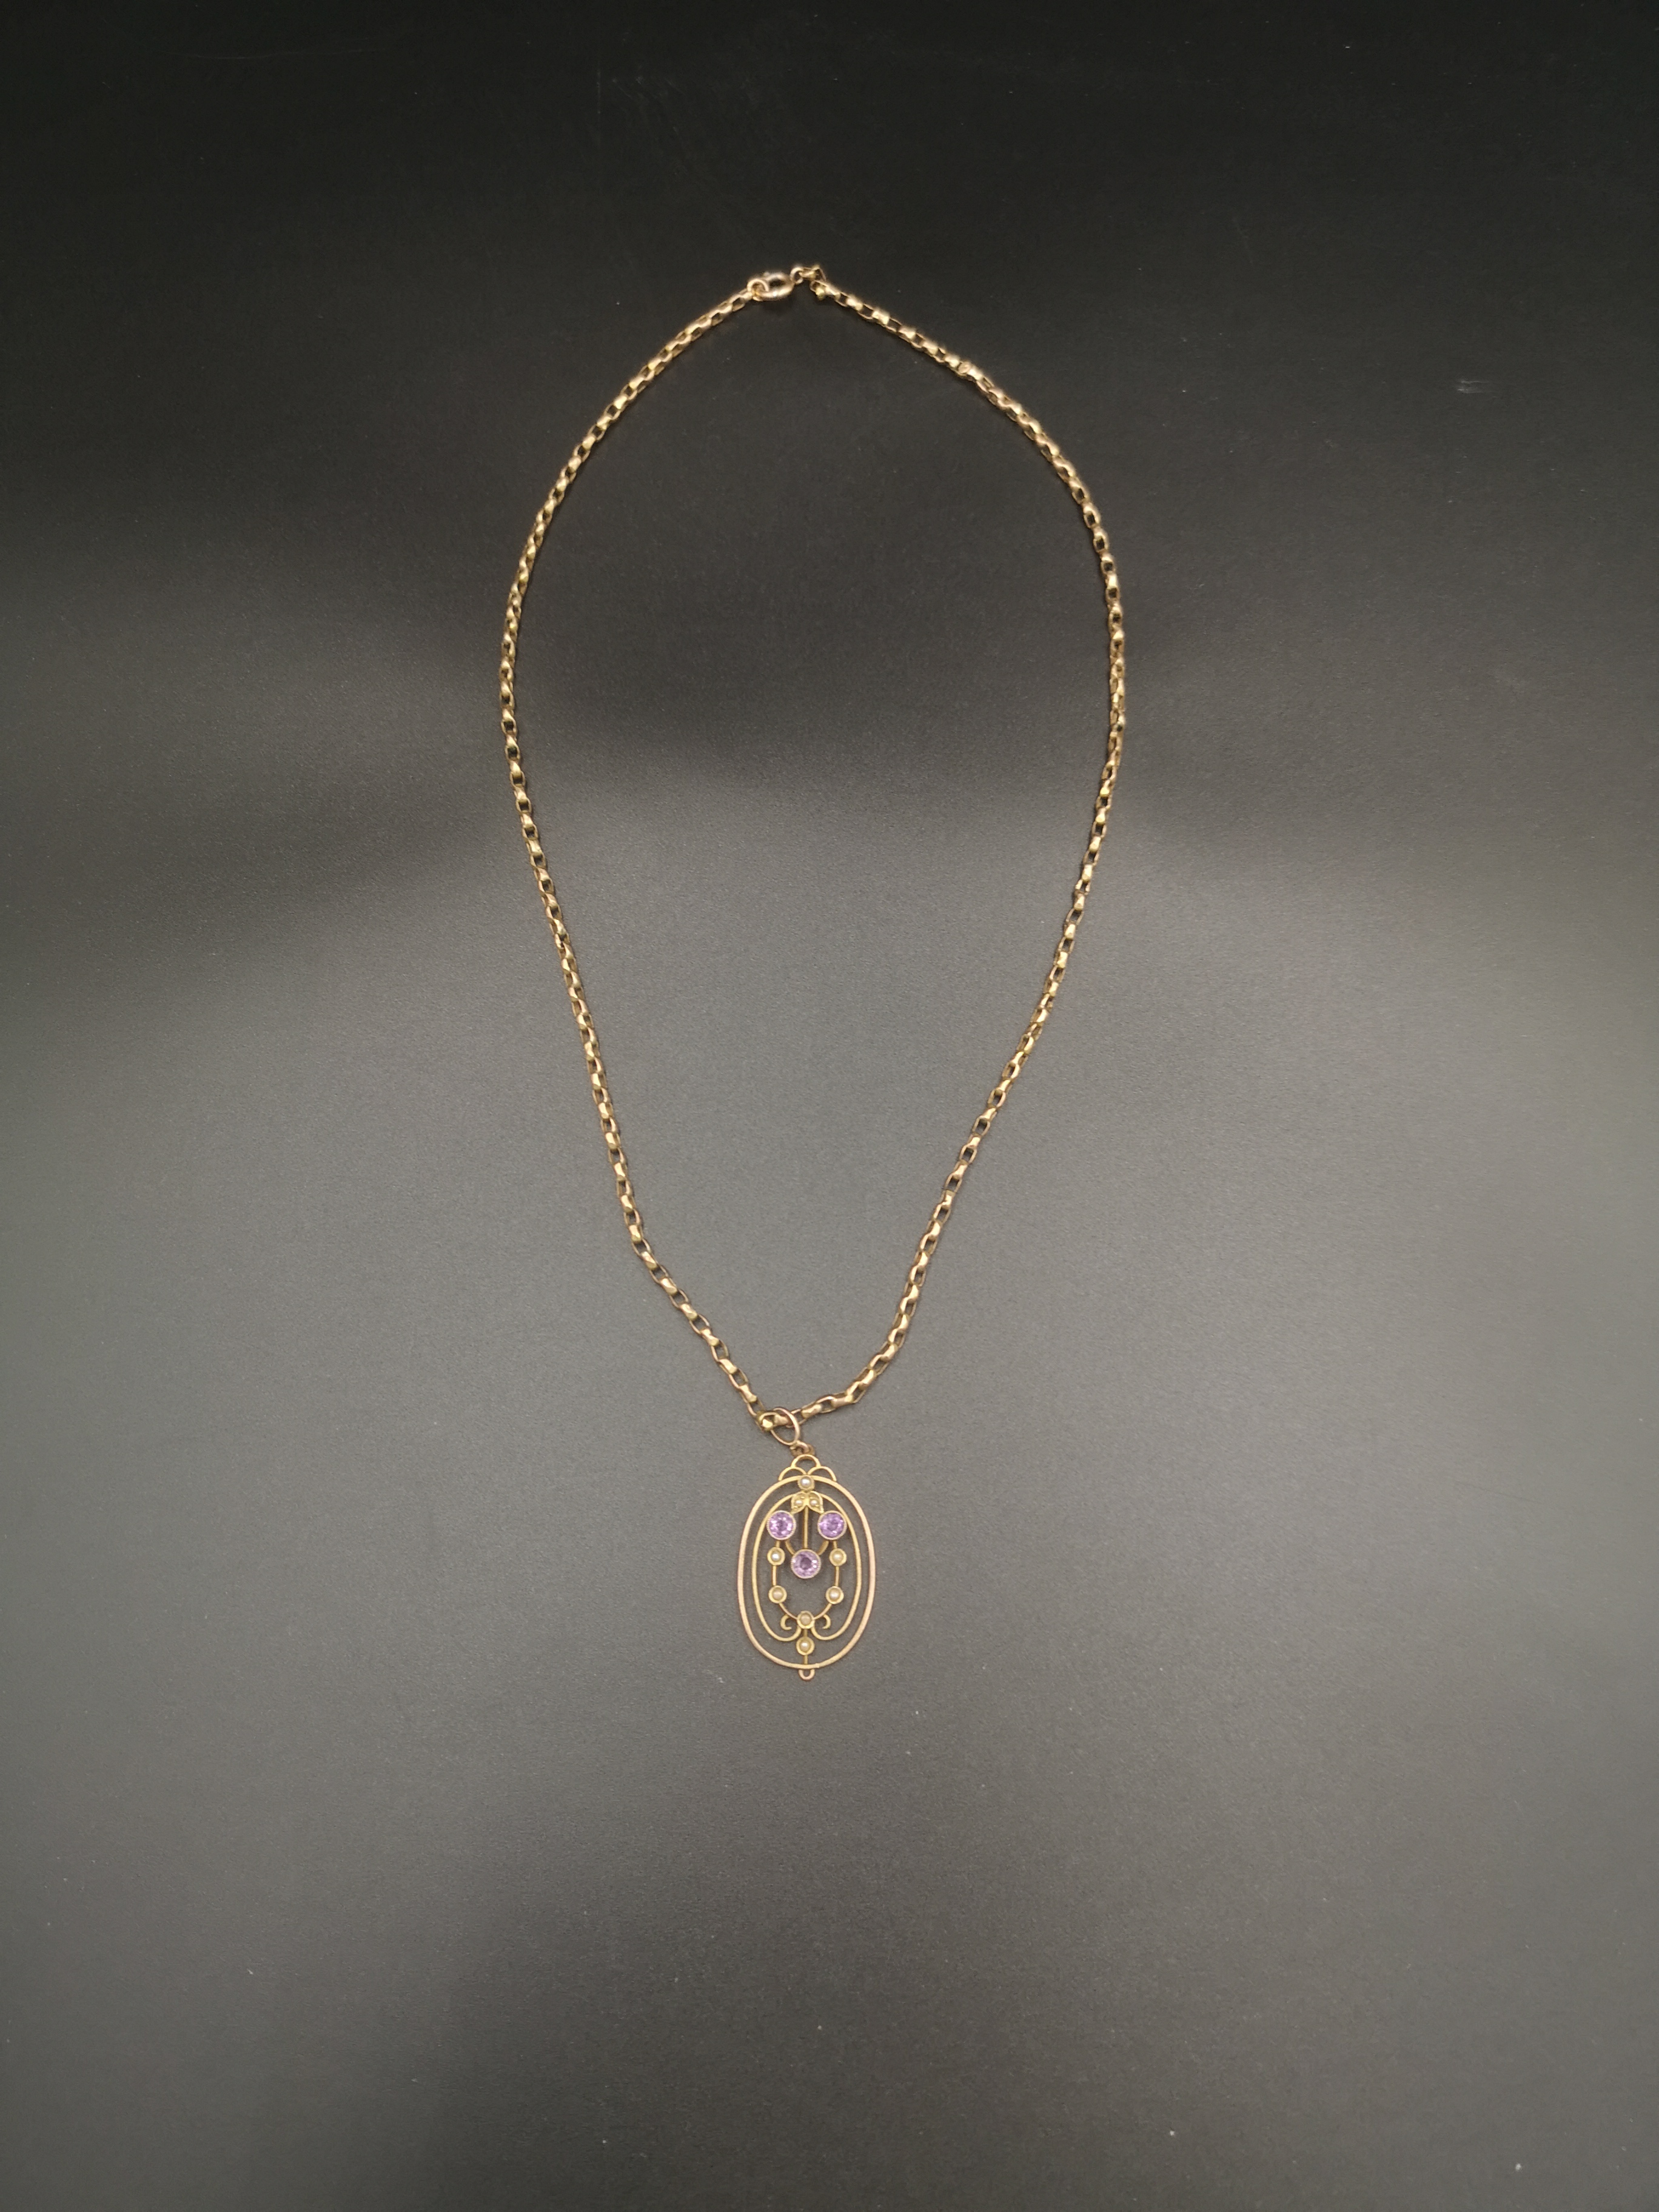 Yellow metal necklace with 9ct gold pendant - Image 5 of 5